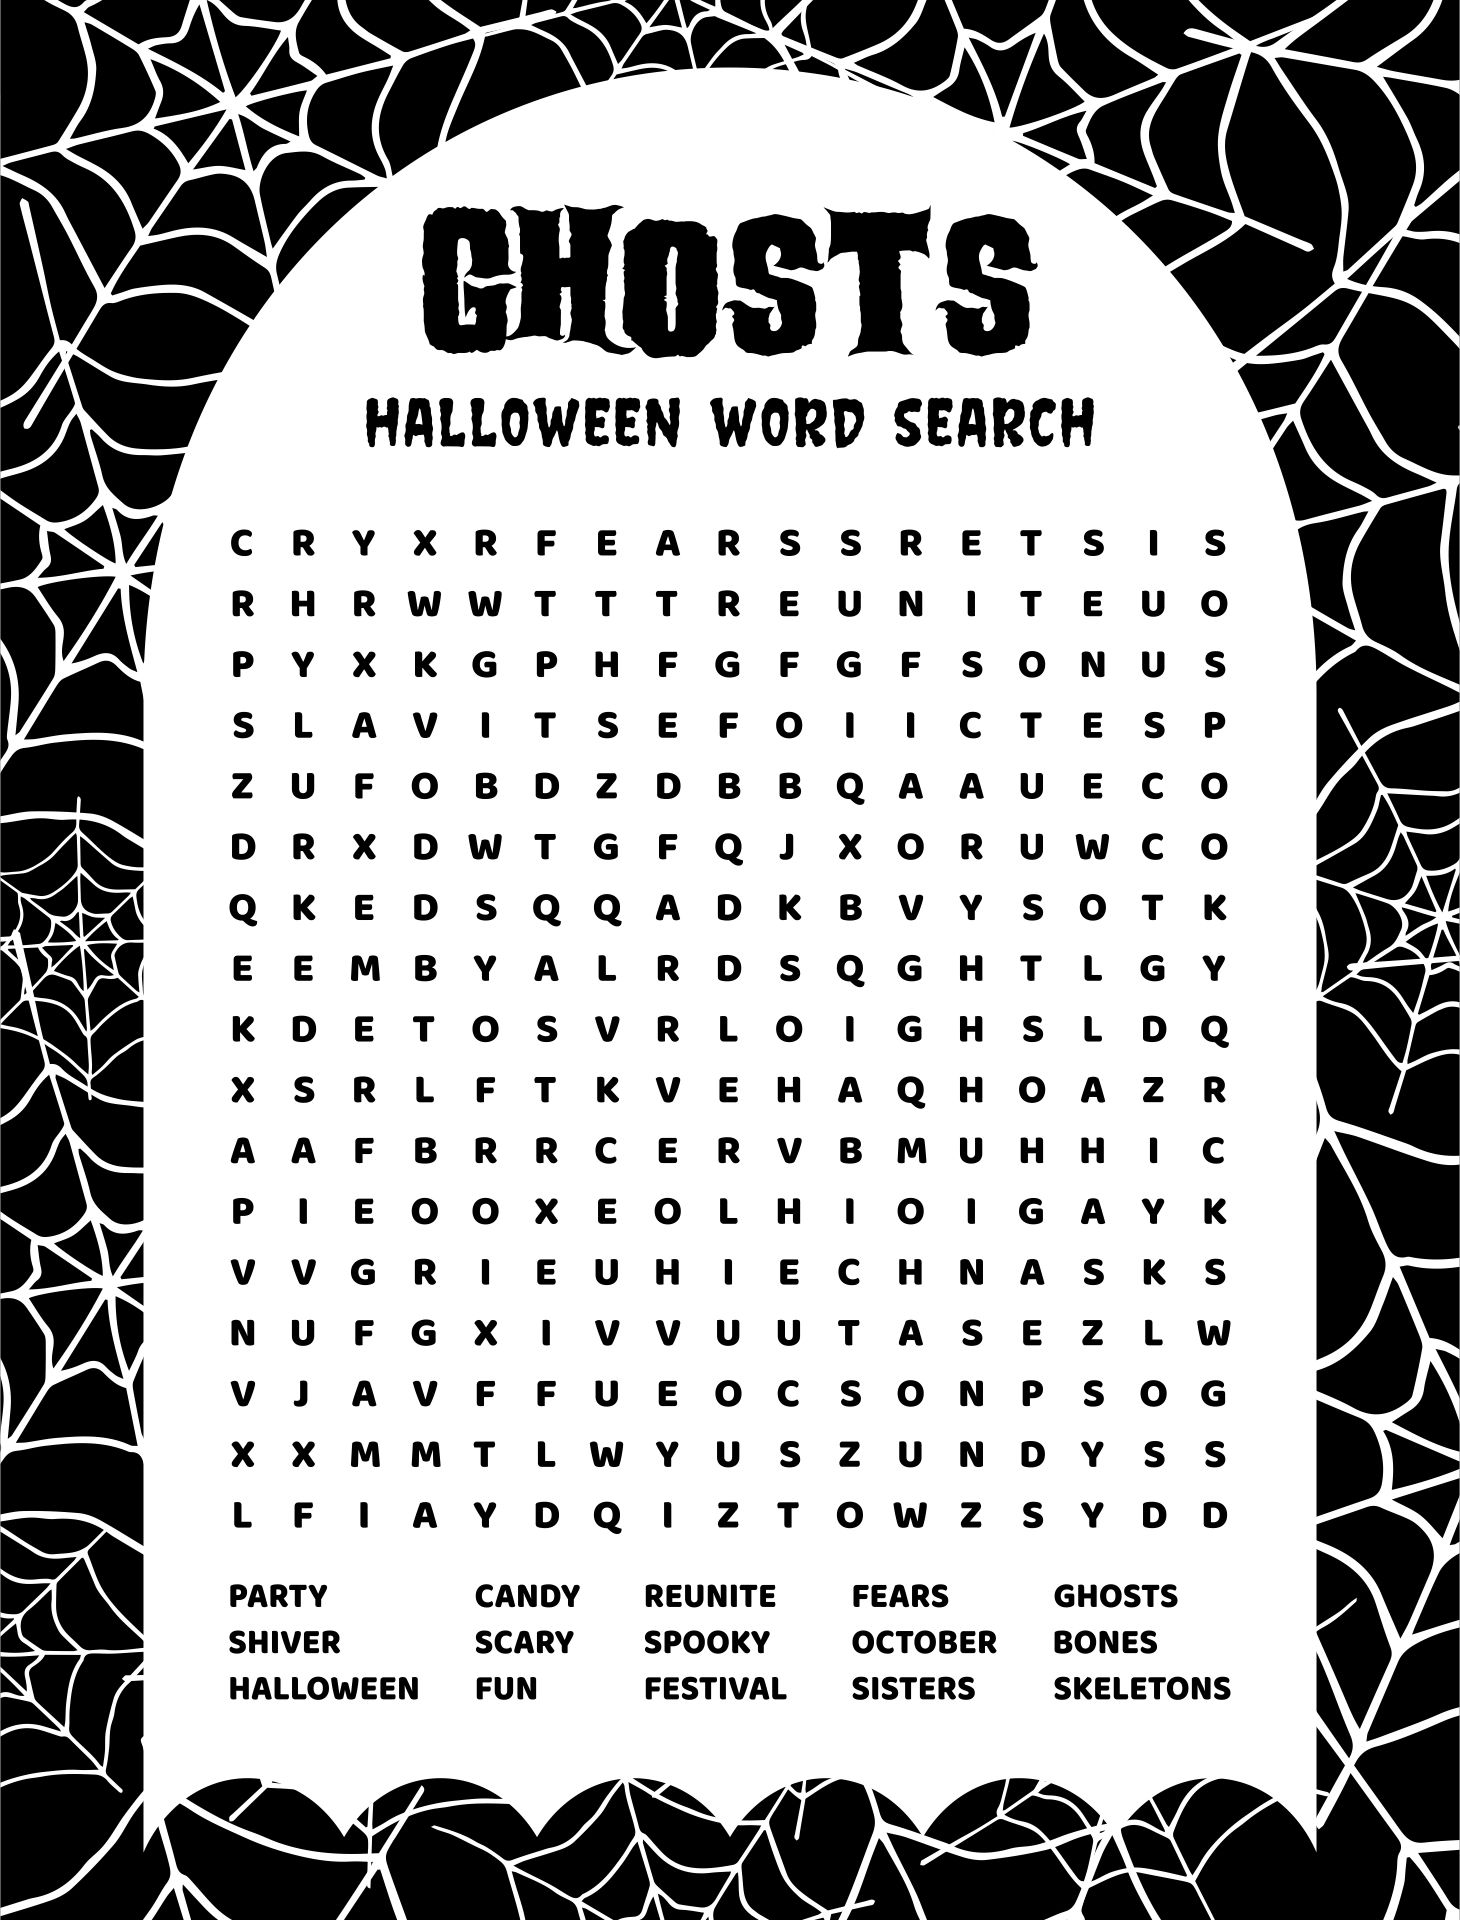 Ghost Halloween Word Search Printable